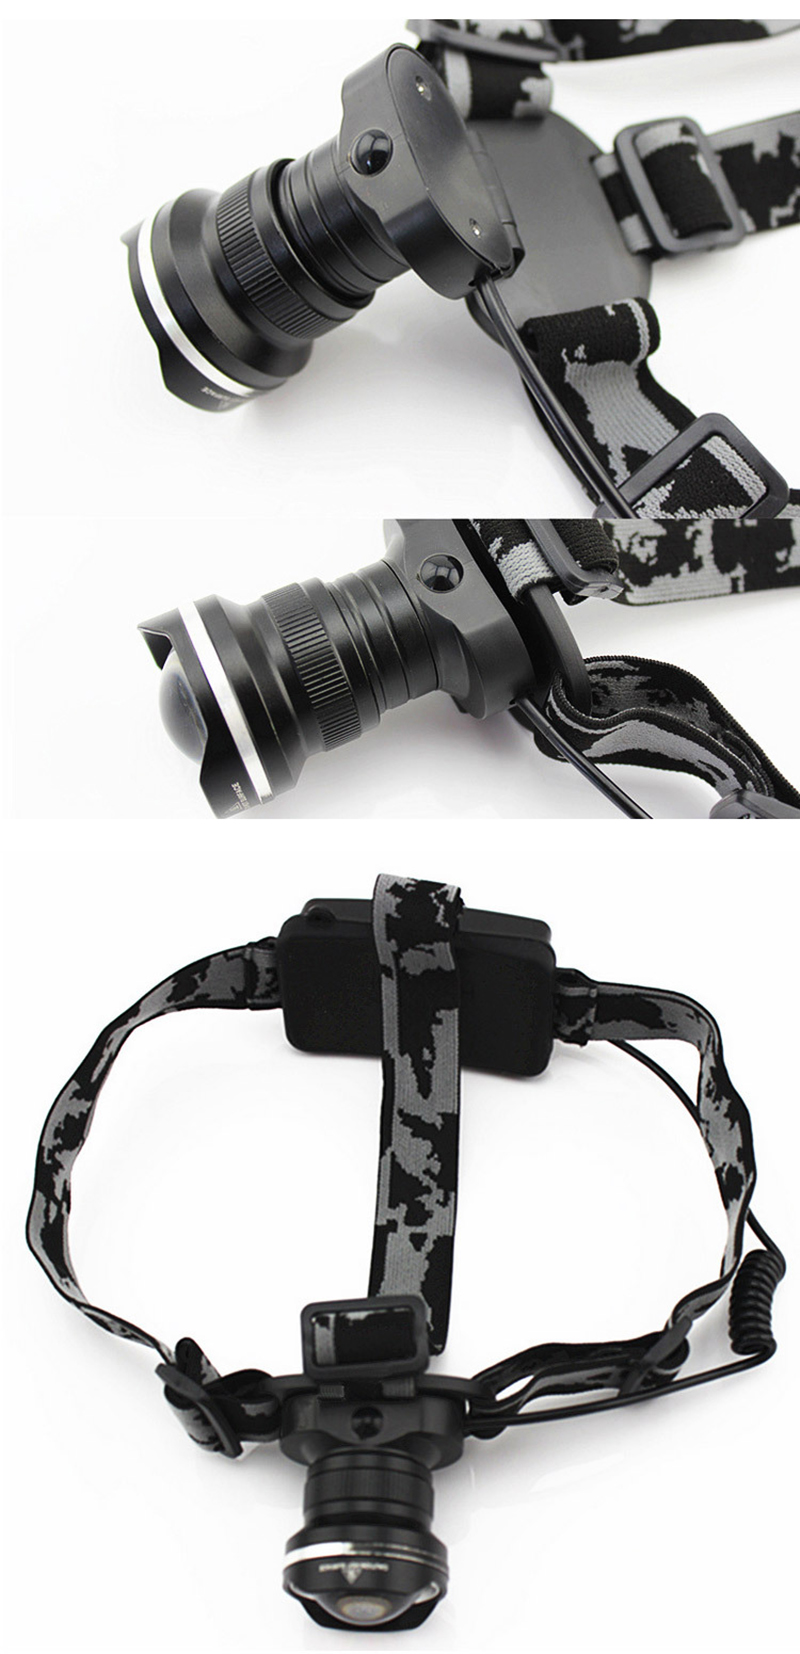 BRELONG LED Headlamp XML-L2 2 x 18650 （No Battery and charger）